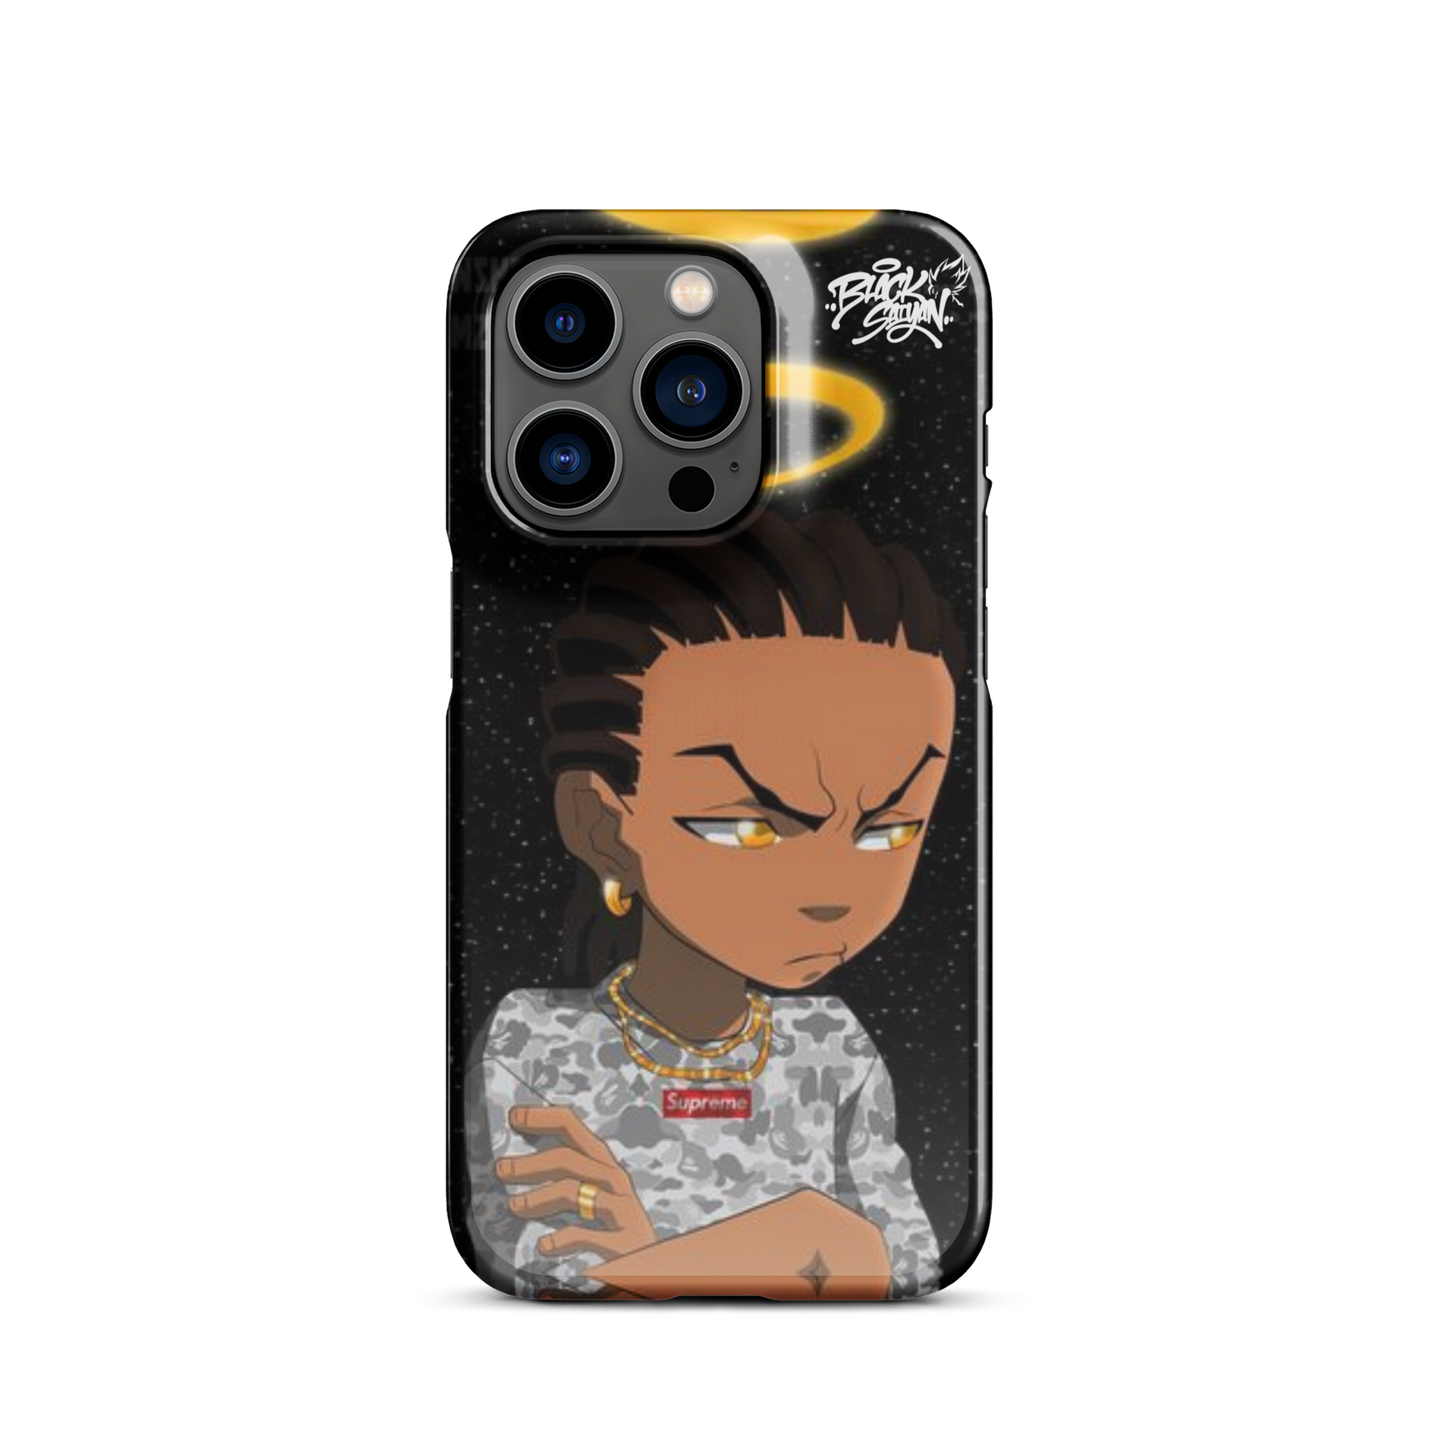 BLACK ANGEL GOLD X SUPREME - Snap case for iPhone®